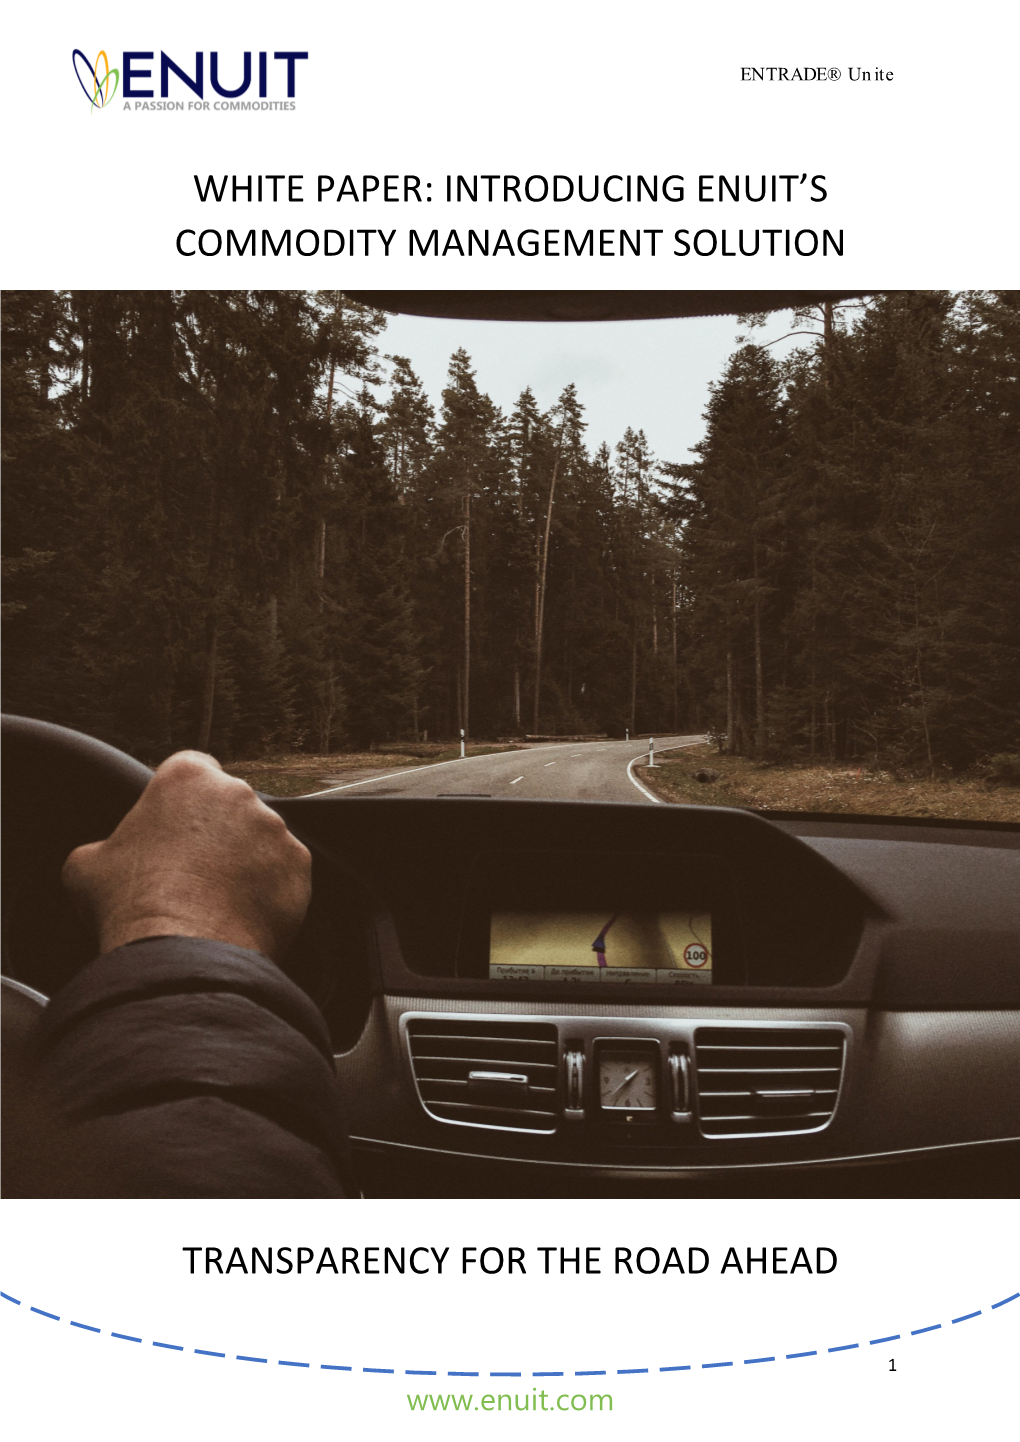 White Paper: Introducing Enuit's Commodity Management Solution